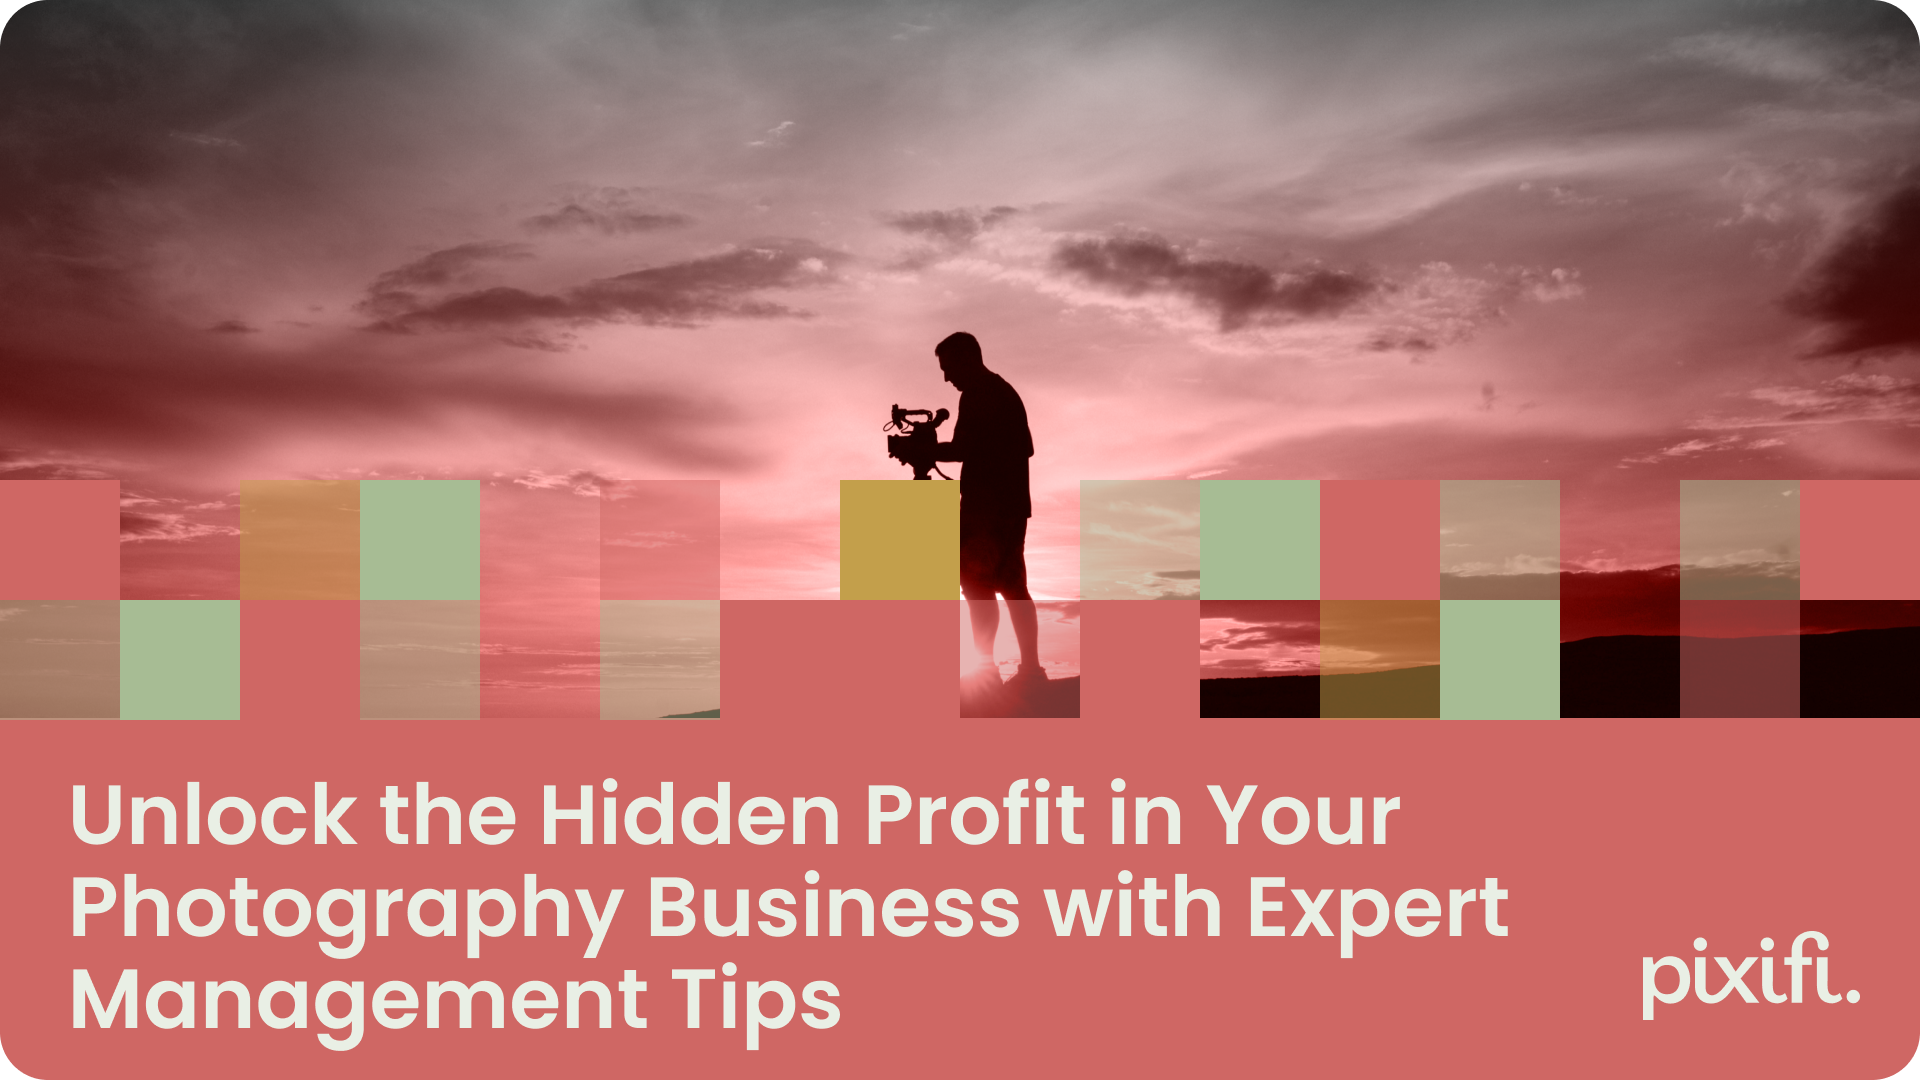 Unlock the Hidden Profit in Your Photography Business with Expert Management Tips